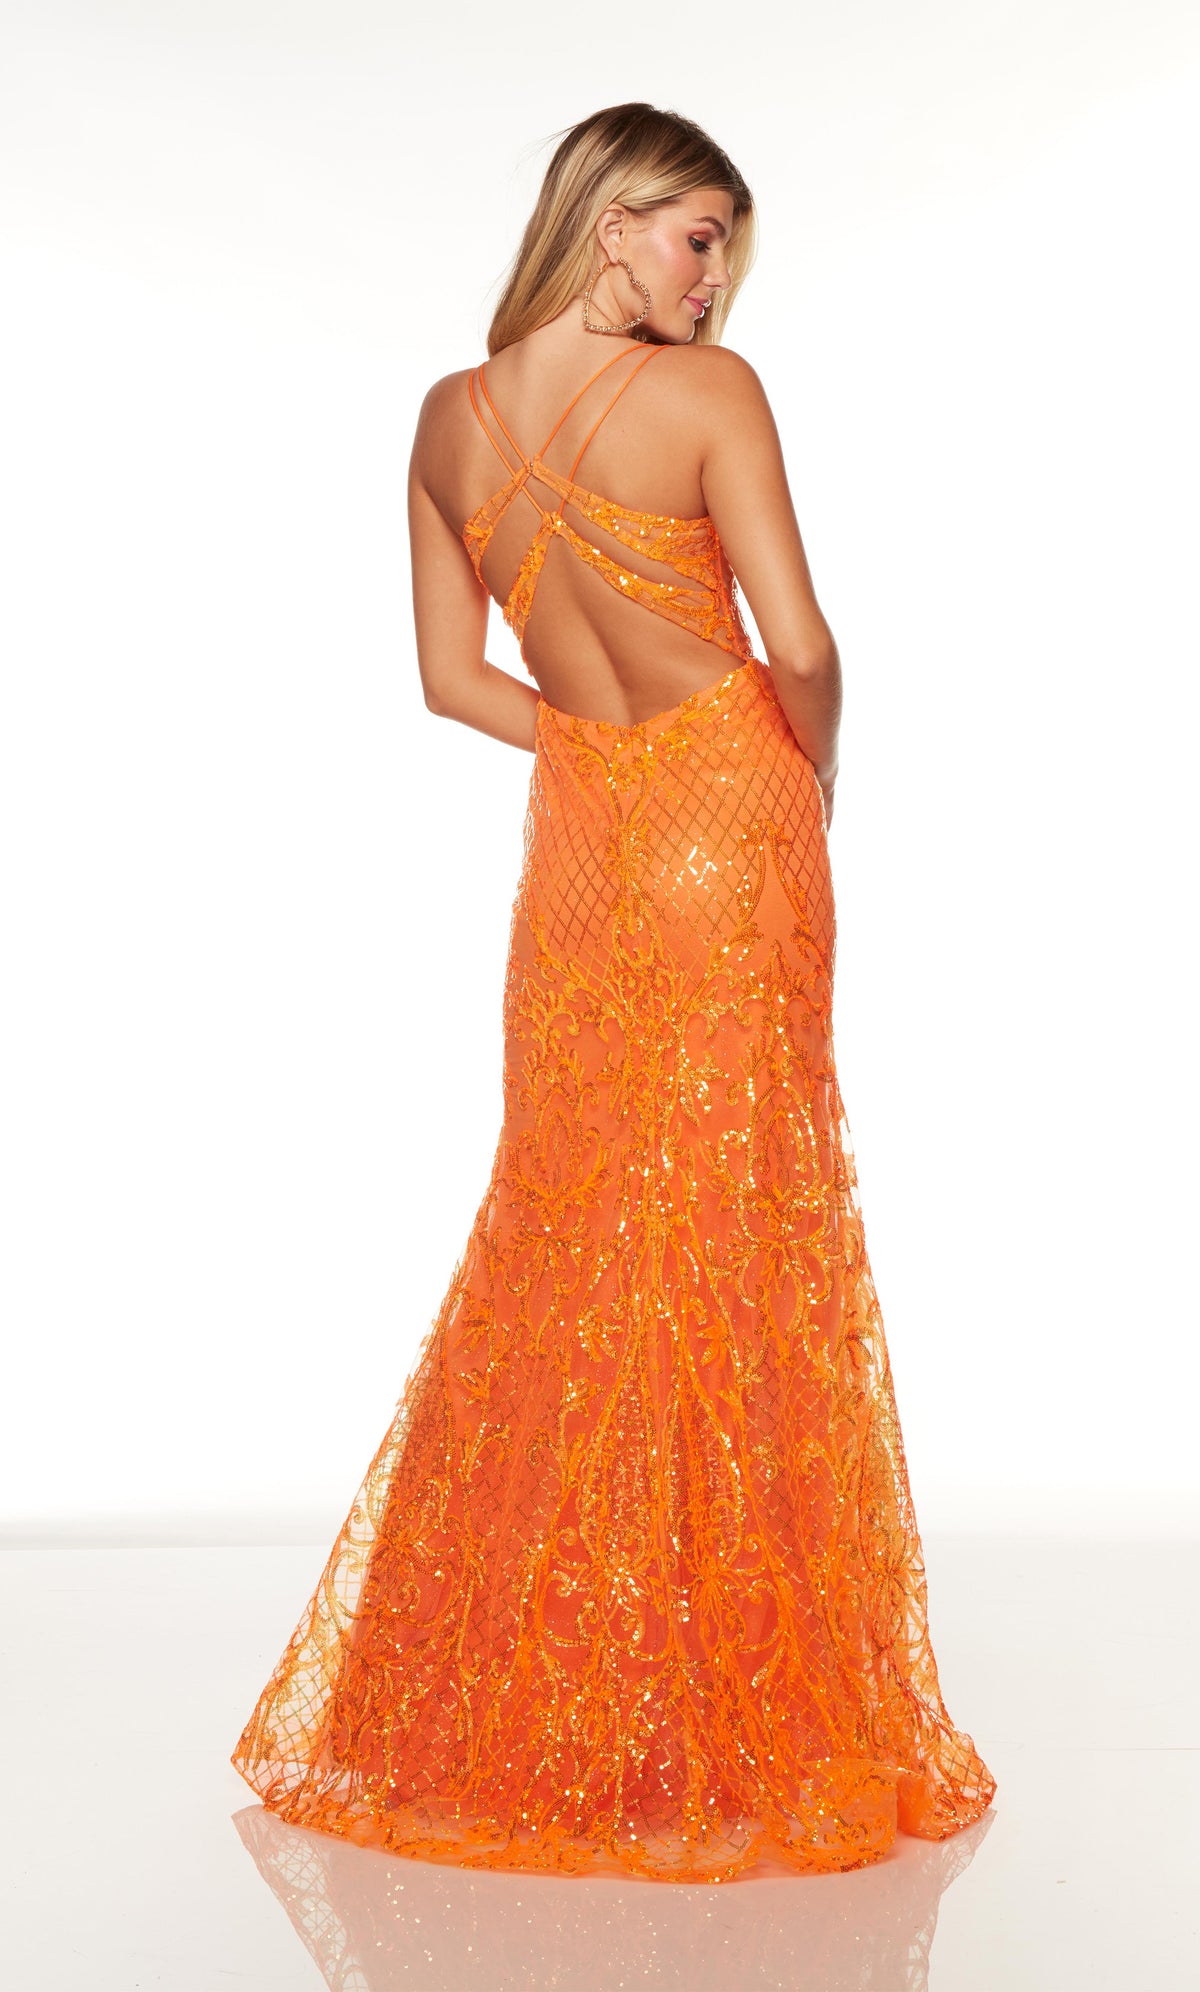 Sparkly fit and flare orange prom dress with a strappy open back.